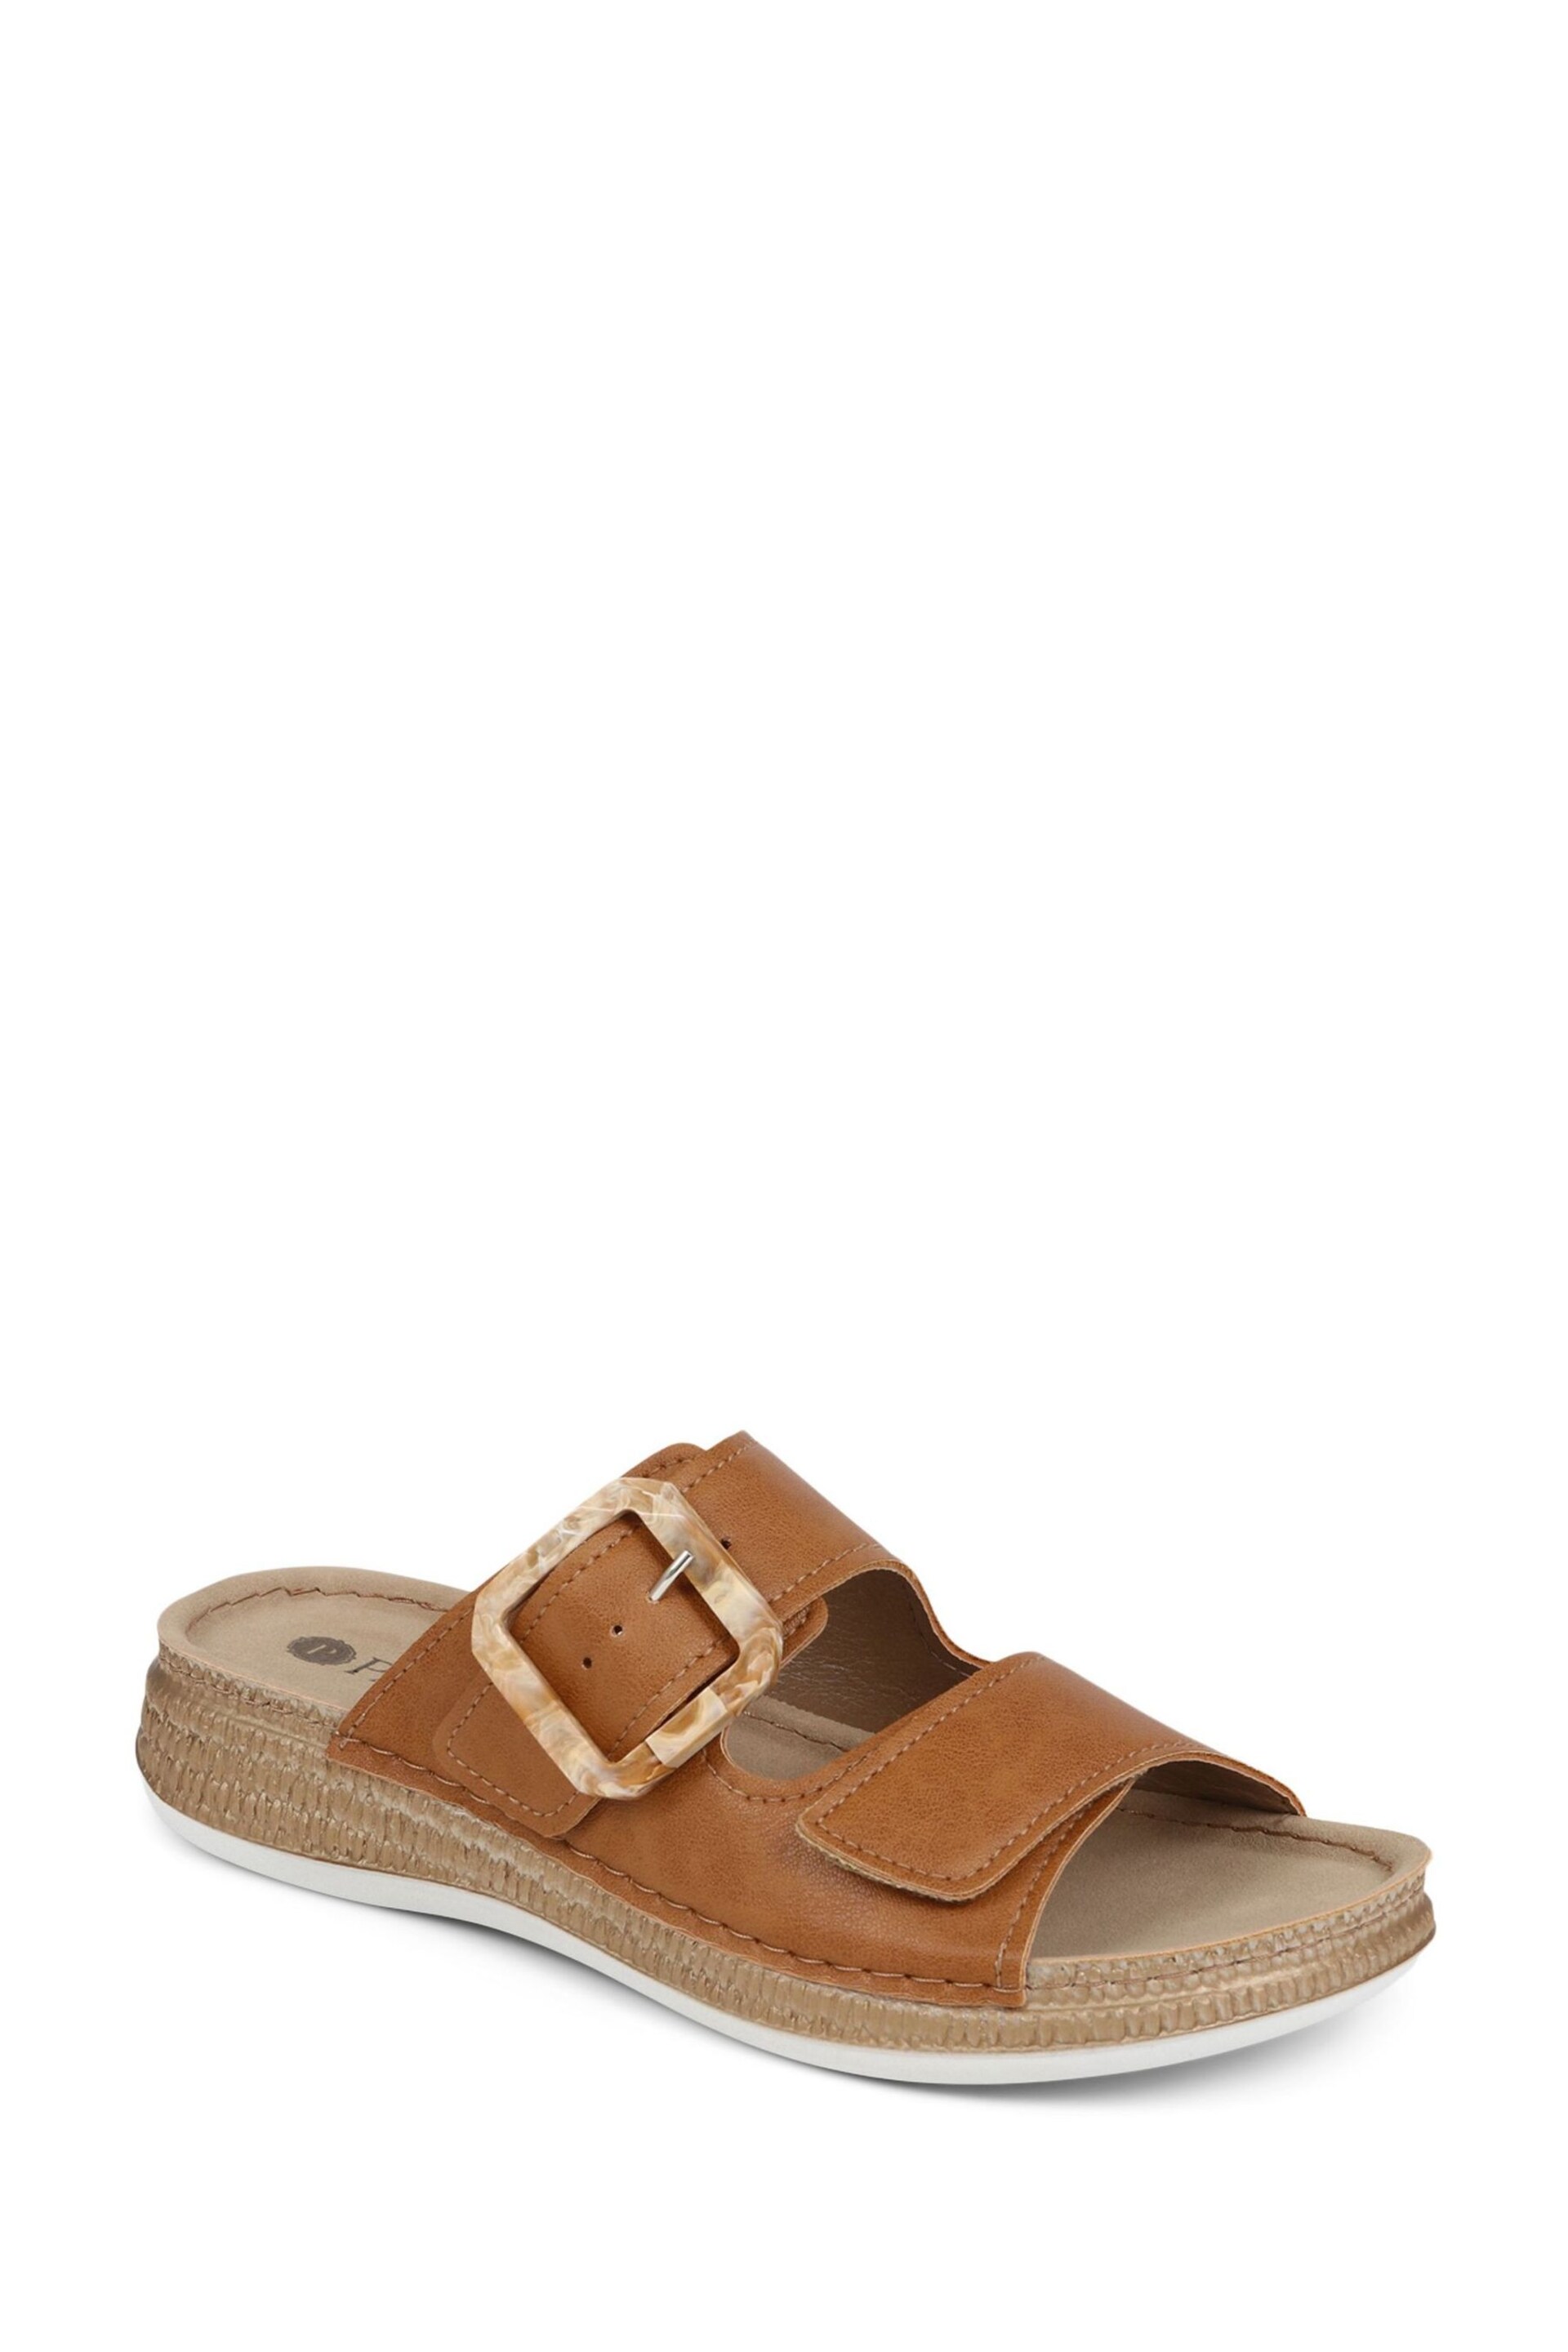 Pavers Ladies Casual Mules - Image 1 of 5